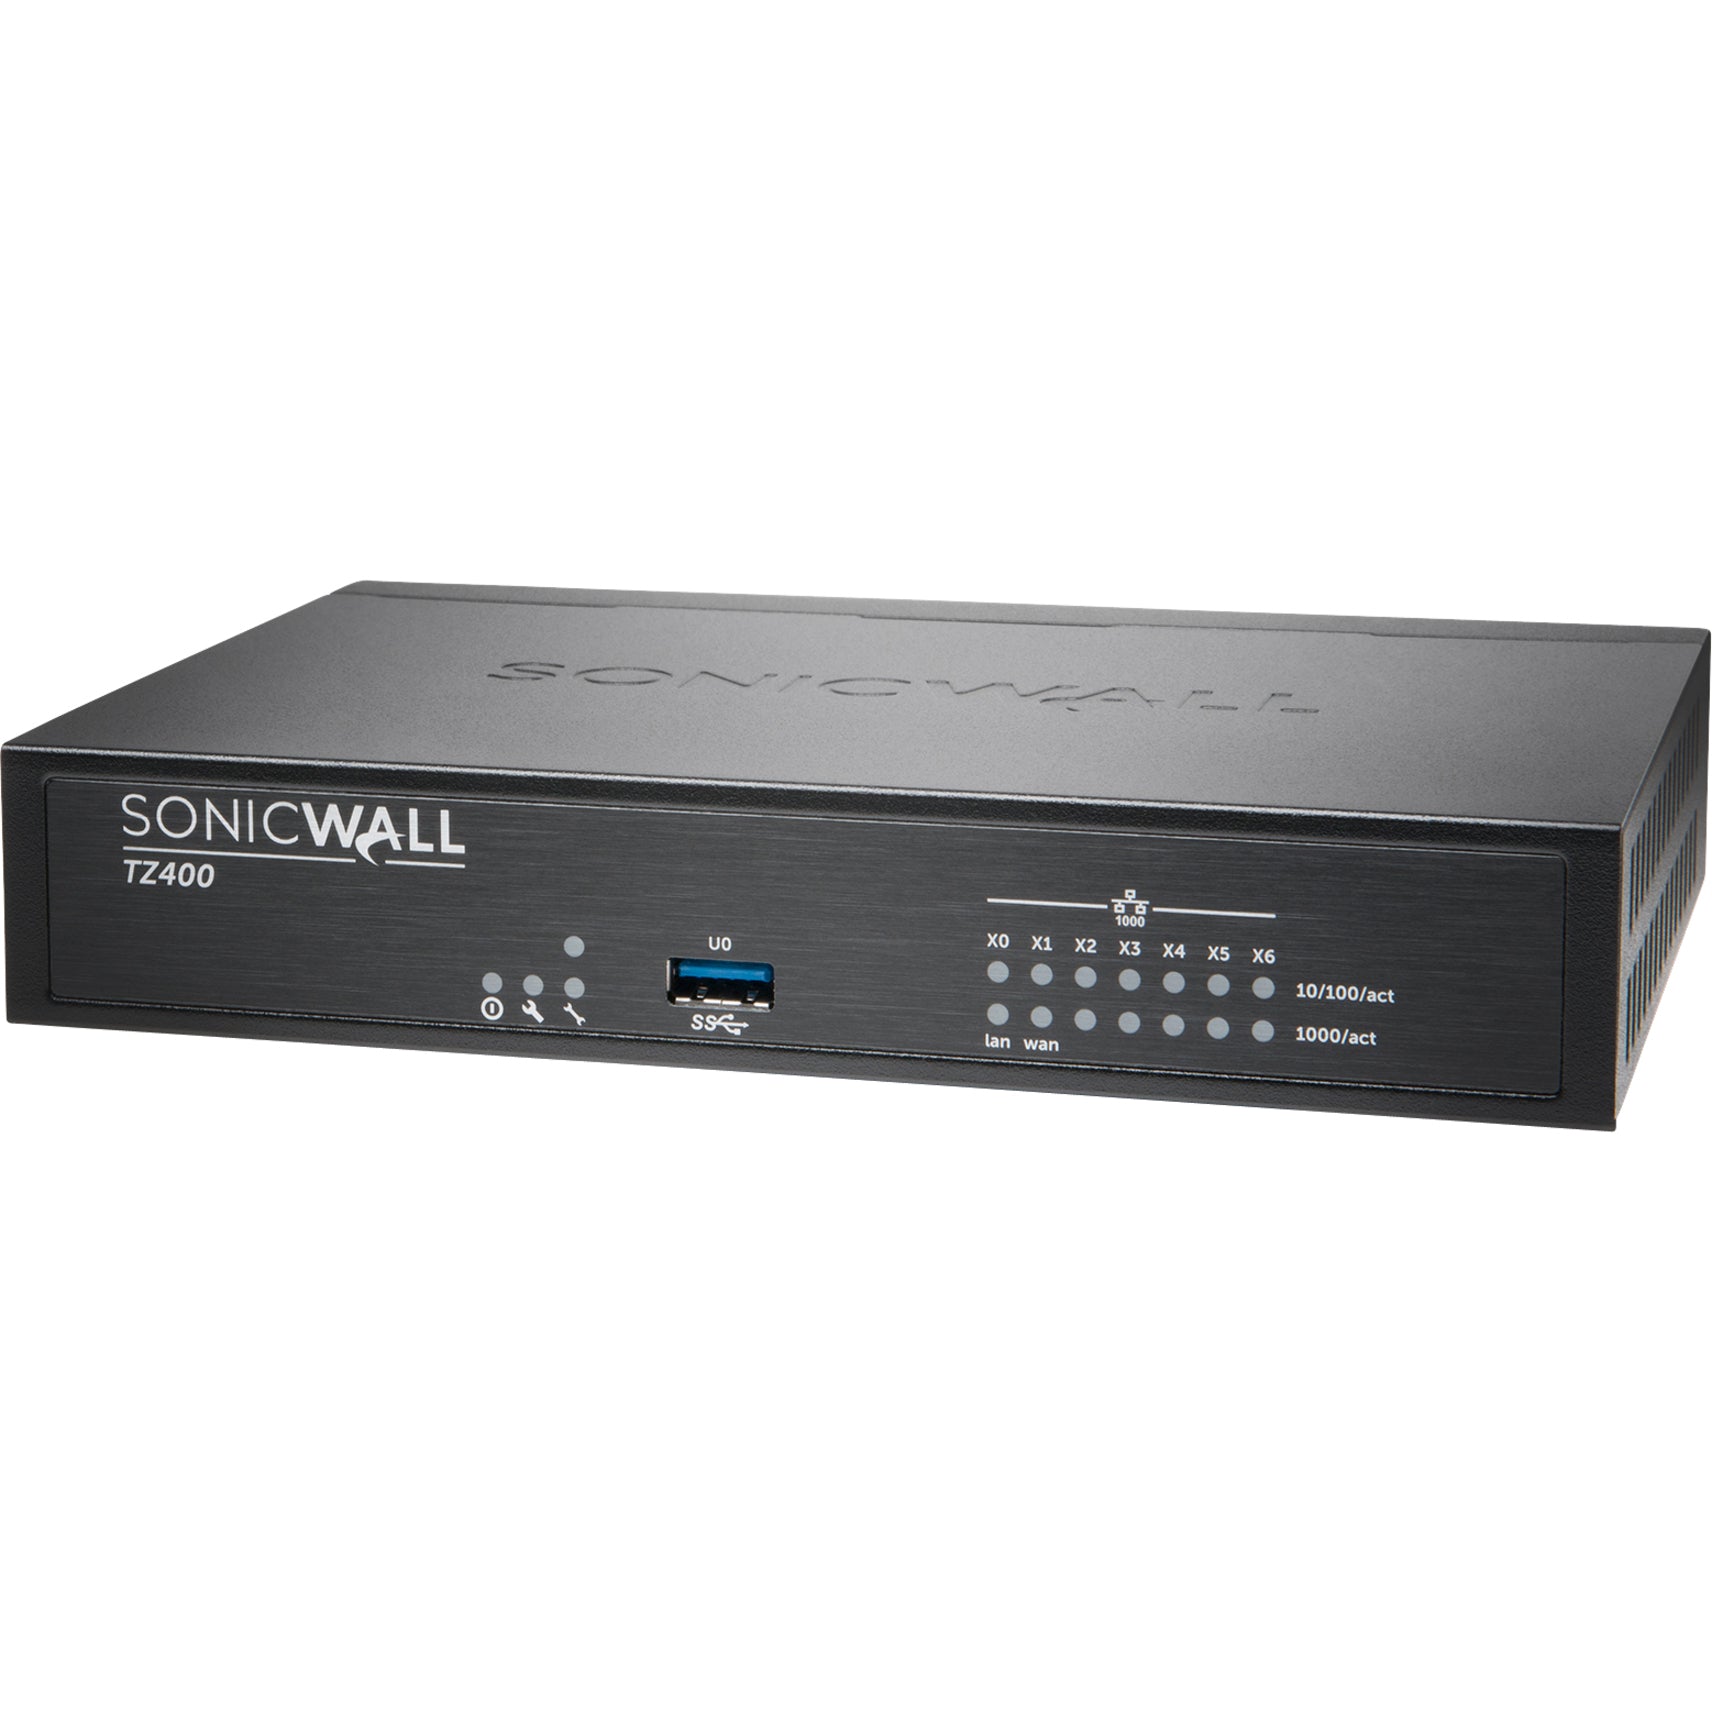 SonicWall 01-SSC-1740 TZ400 Network Security/Firewall Appliance, 7 Ports, AES Encryption, Gigabit Ethernet